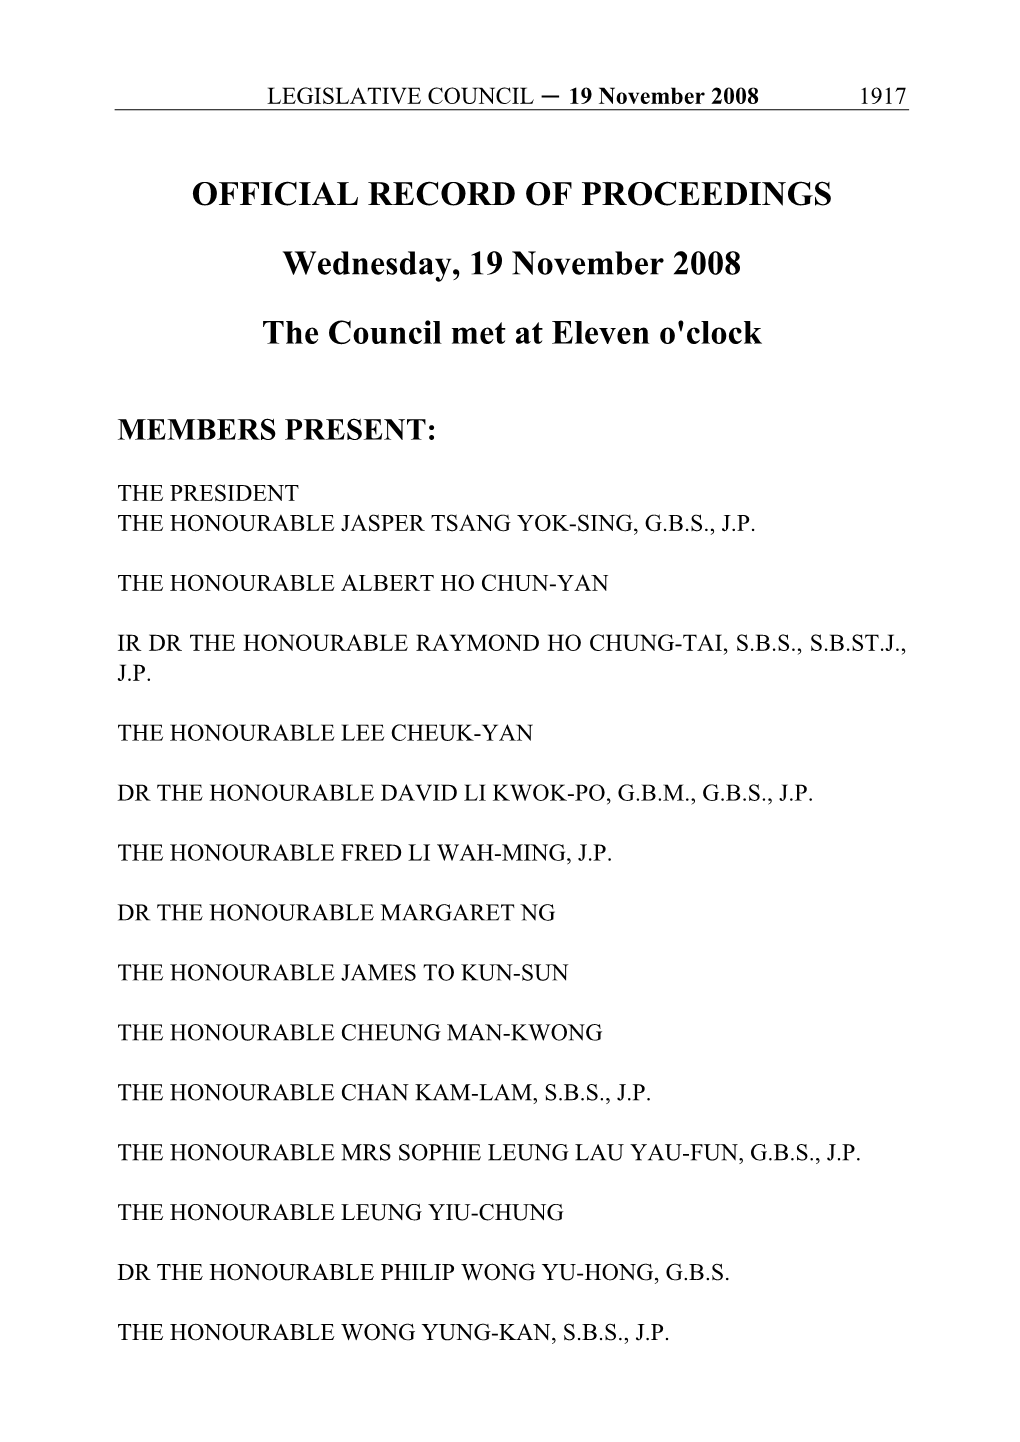 OFFICIAL RECORD of PROCEEDINGS Wednesday, 19